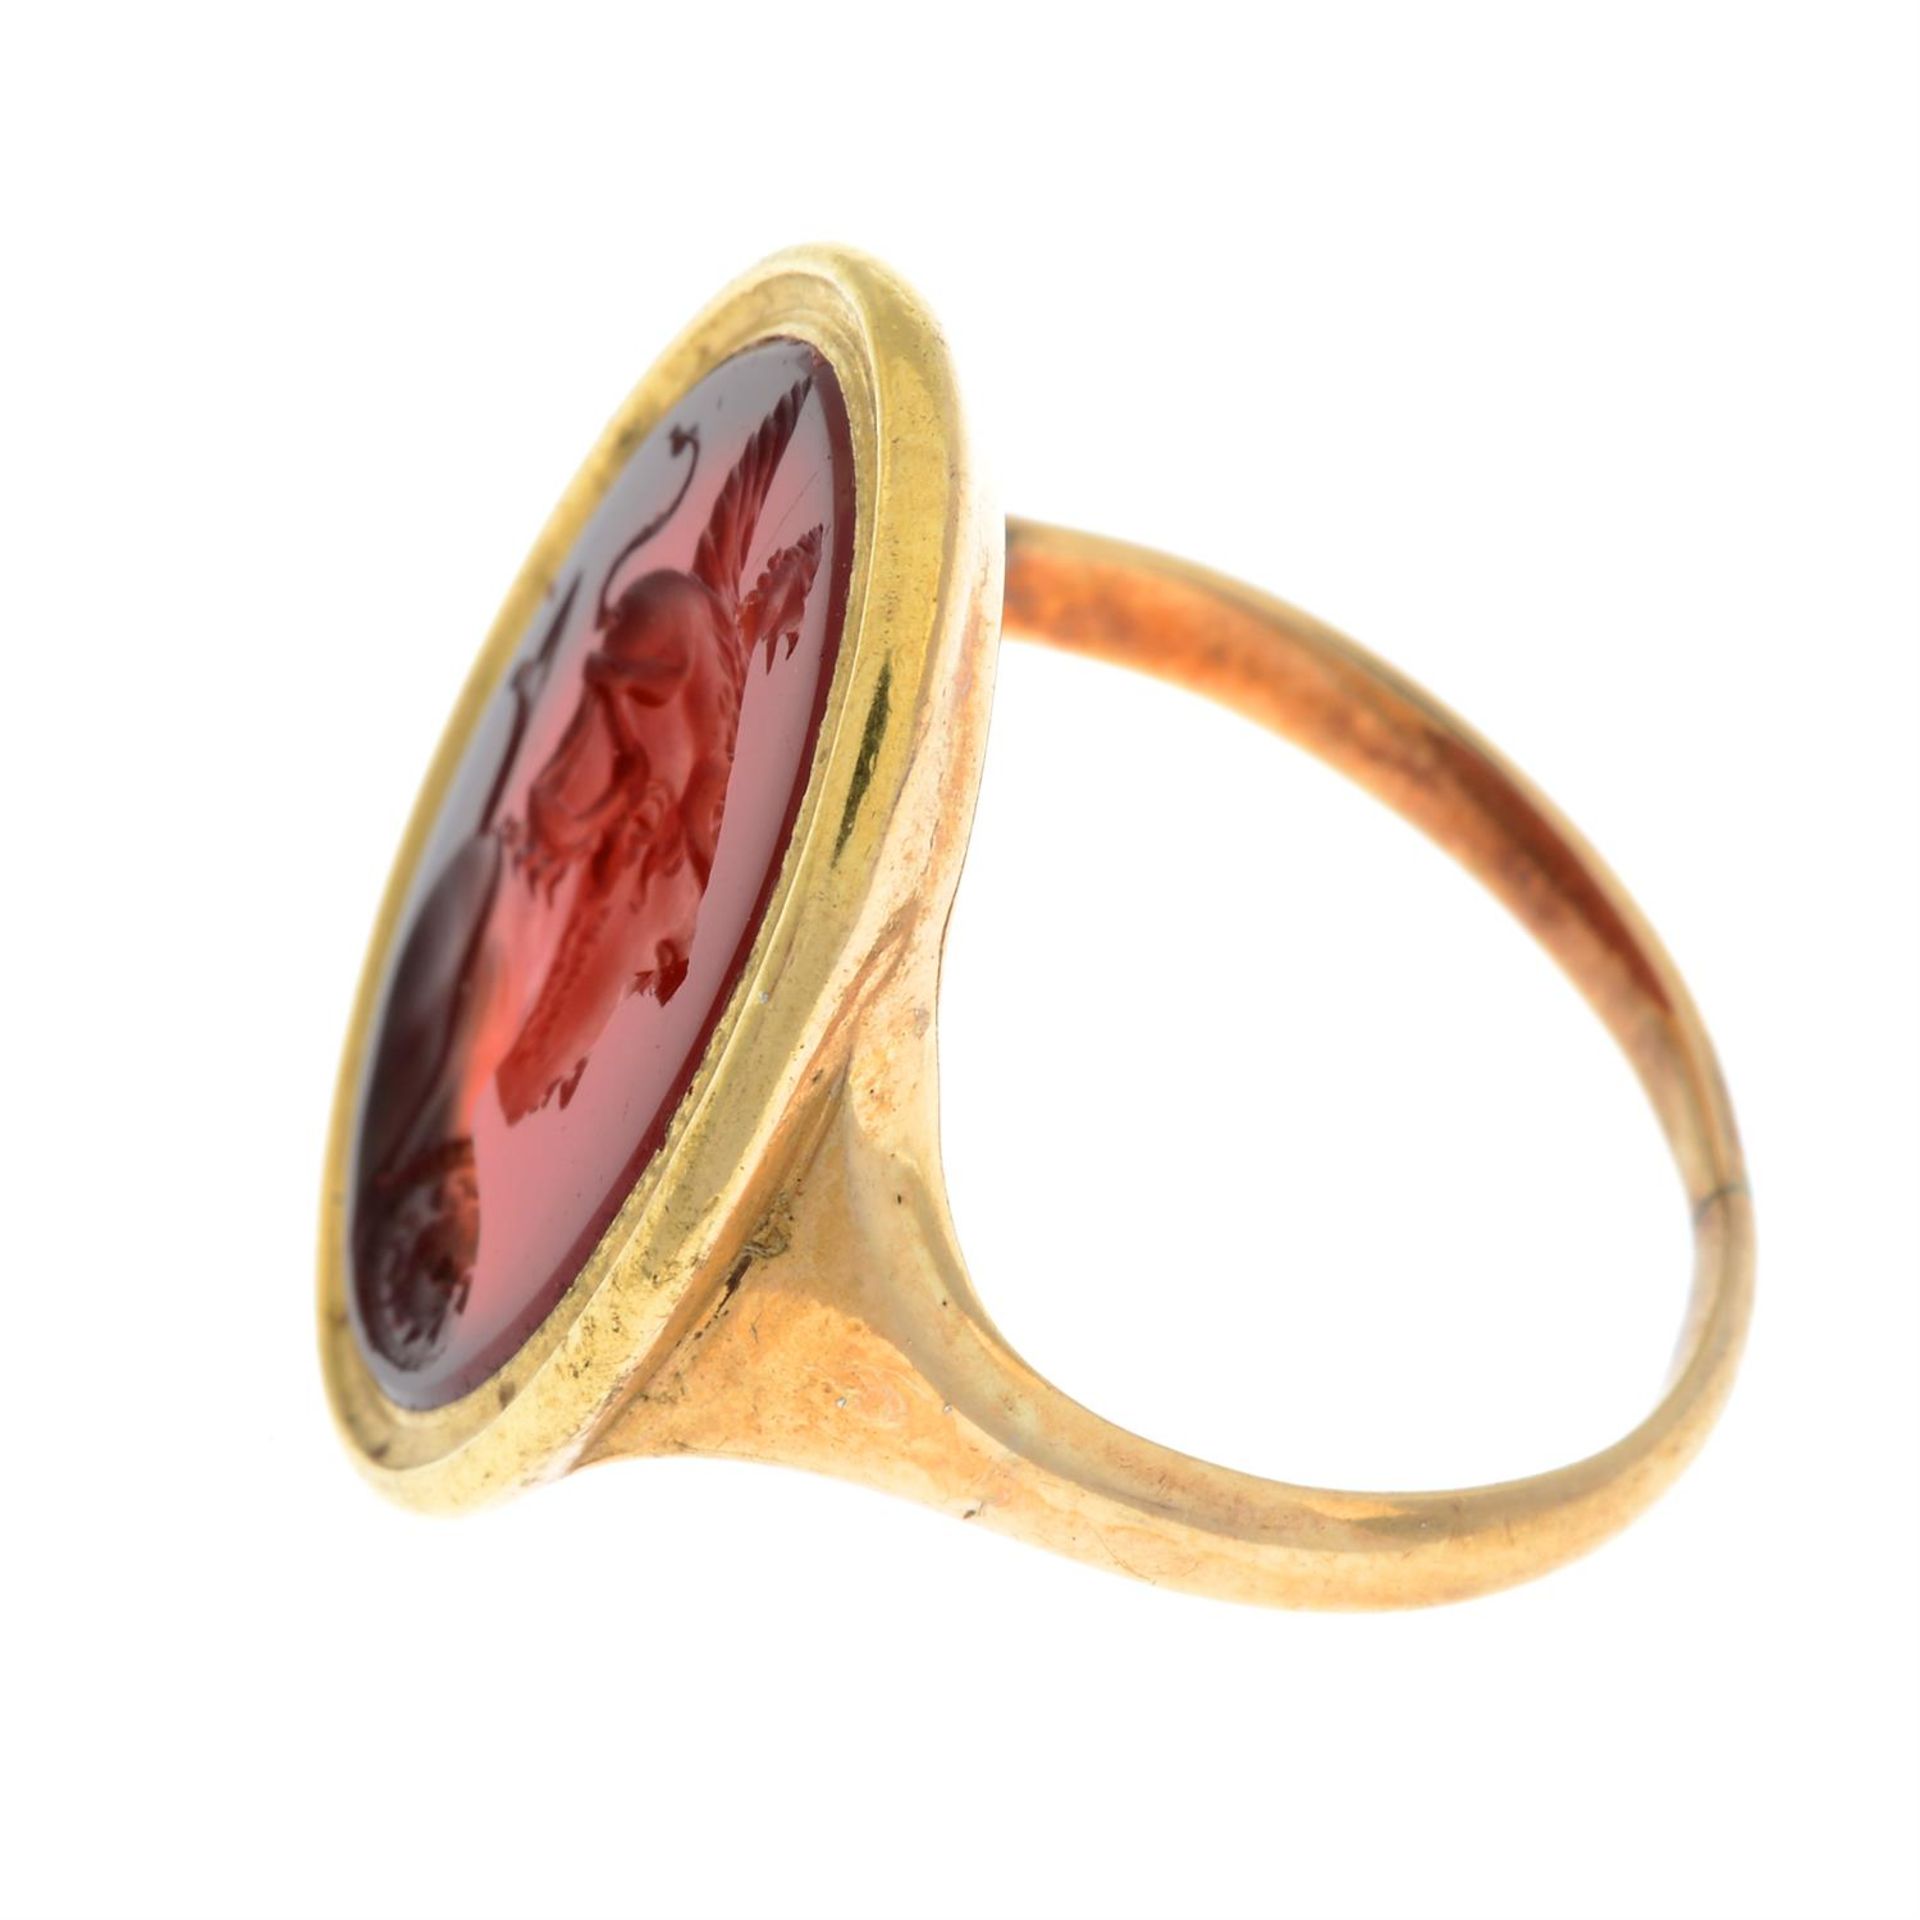 A 19th century gold carnelian intaglio ring, carved to depict Achilles. - Image 4 of 6